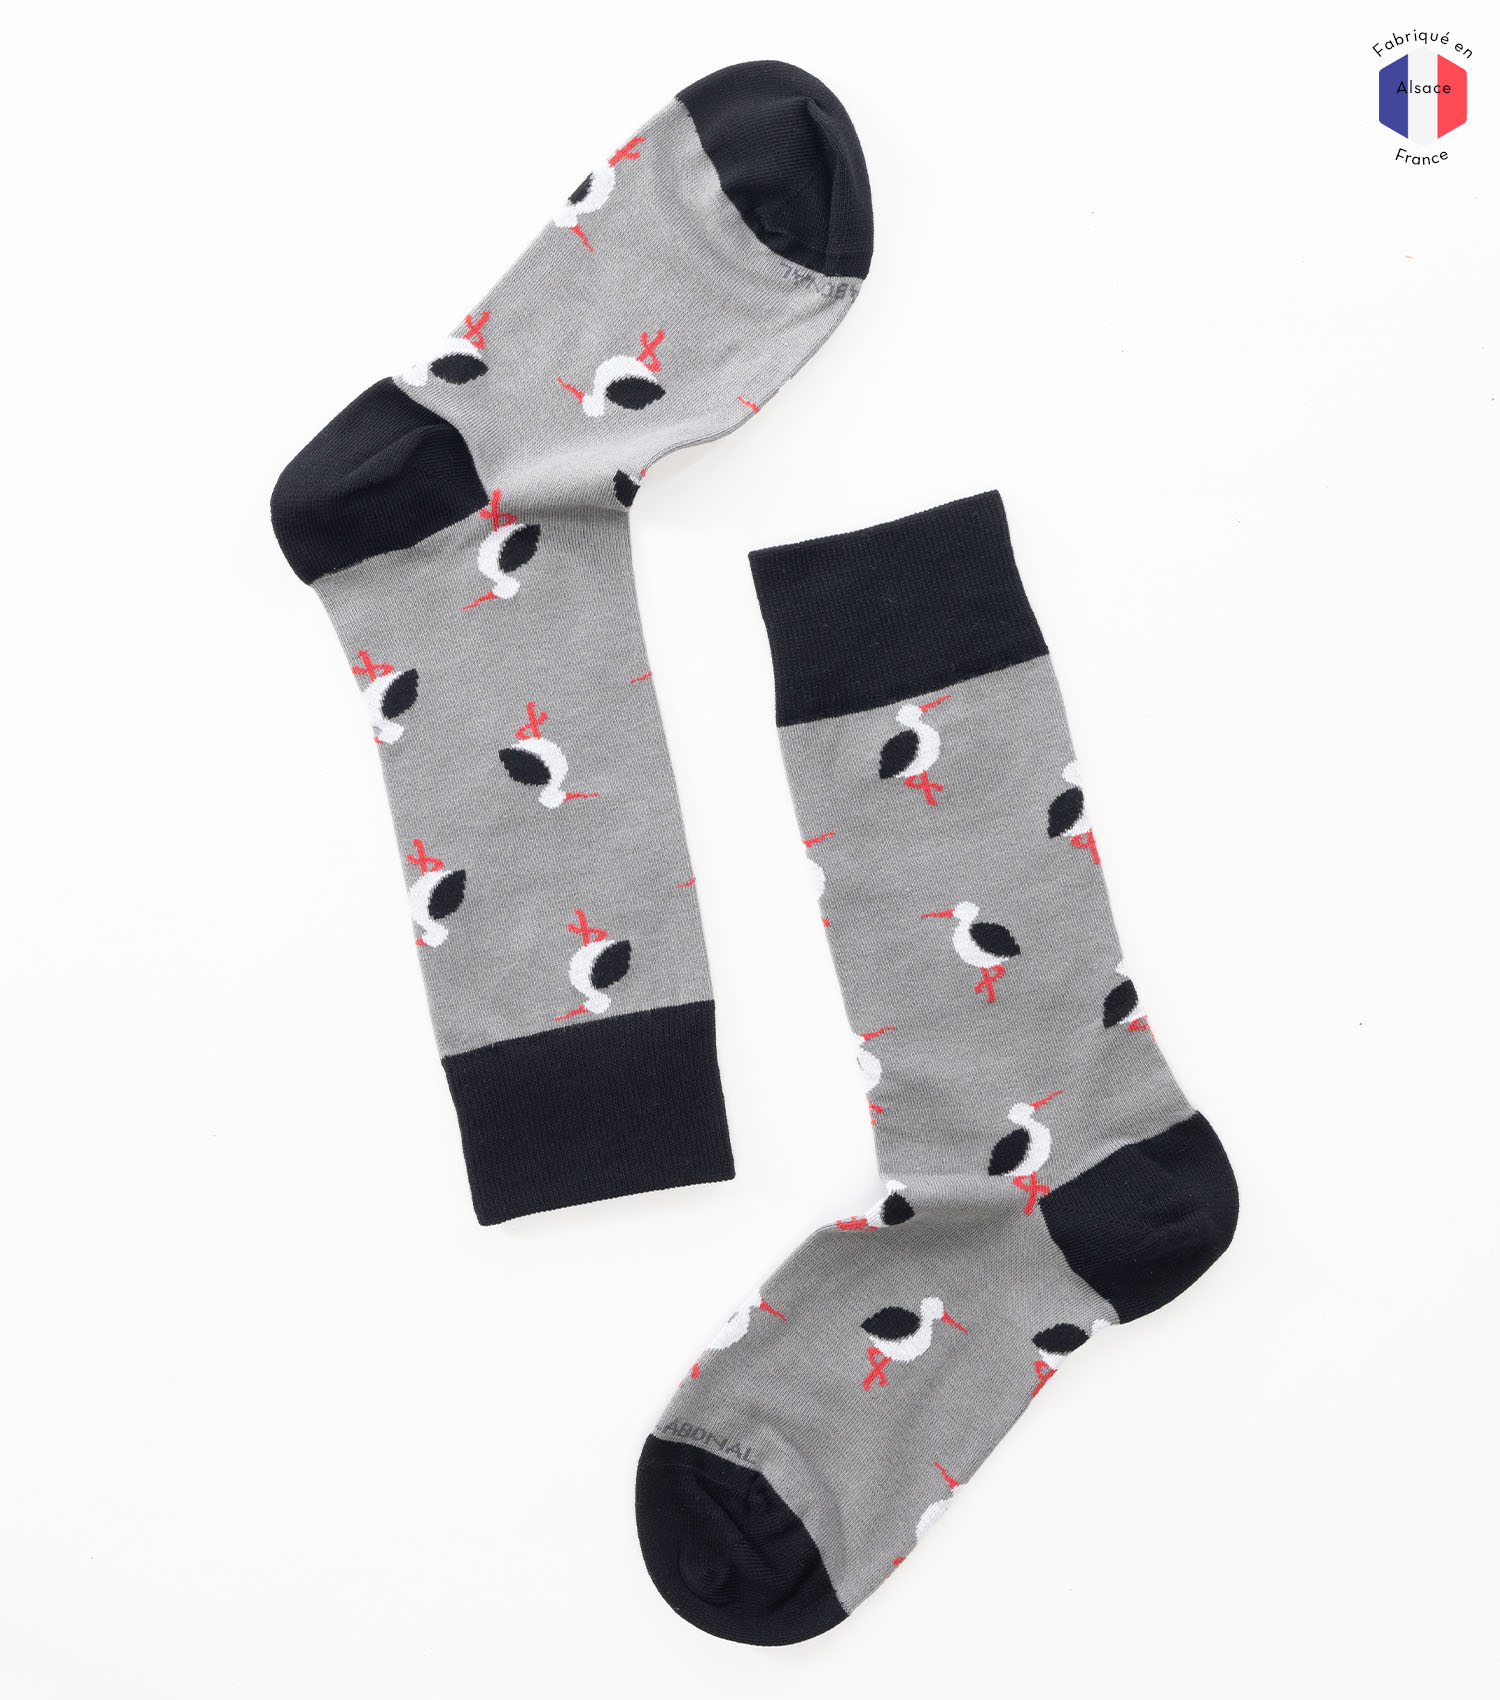 theim-chaussettes-cigogne-homme-labonal-made-in-alsace-1500x1700px